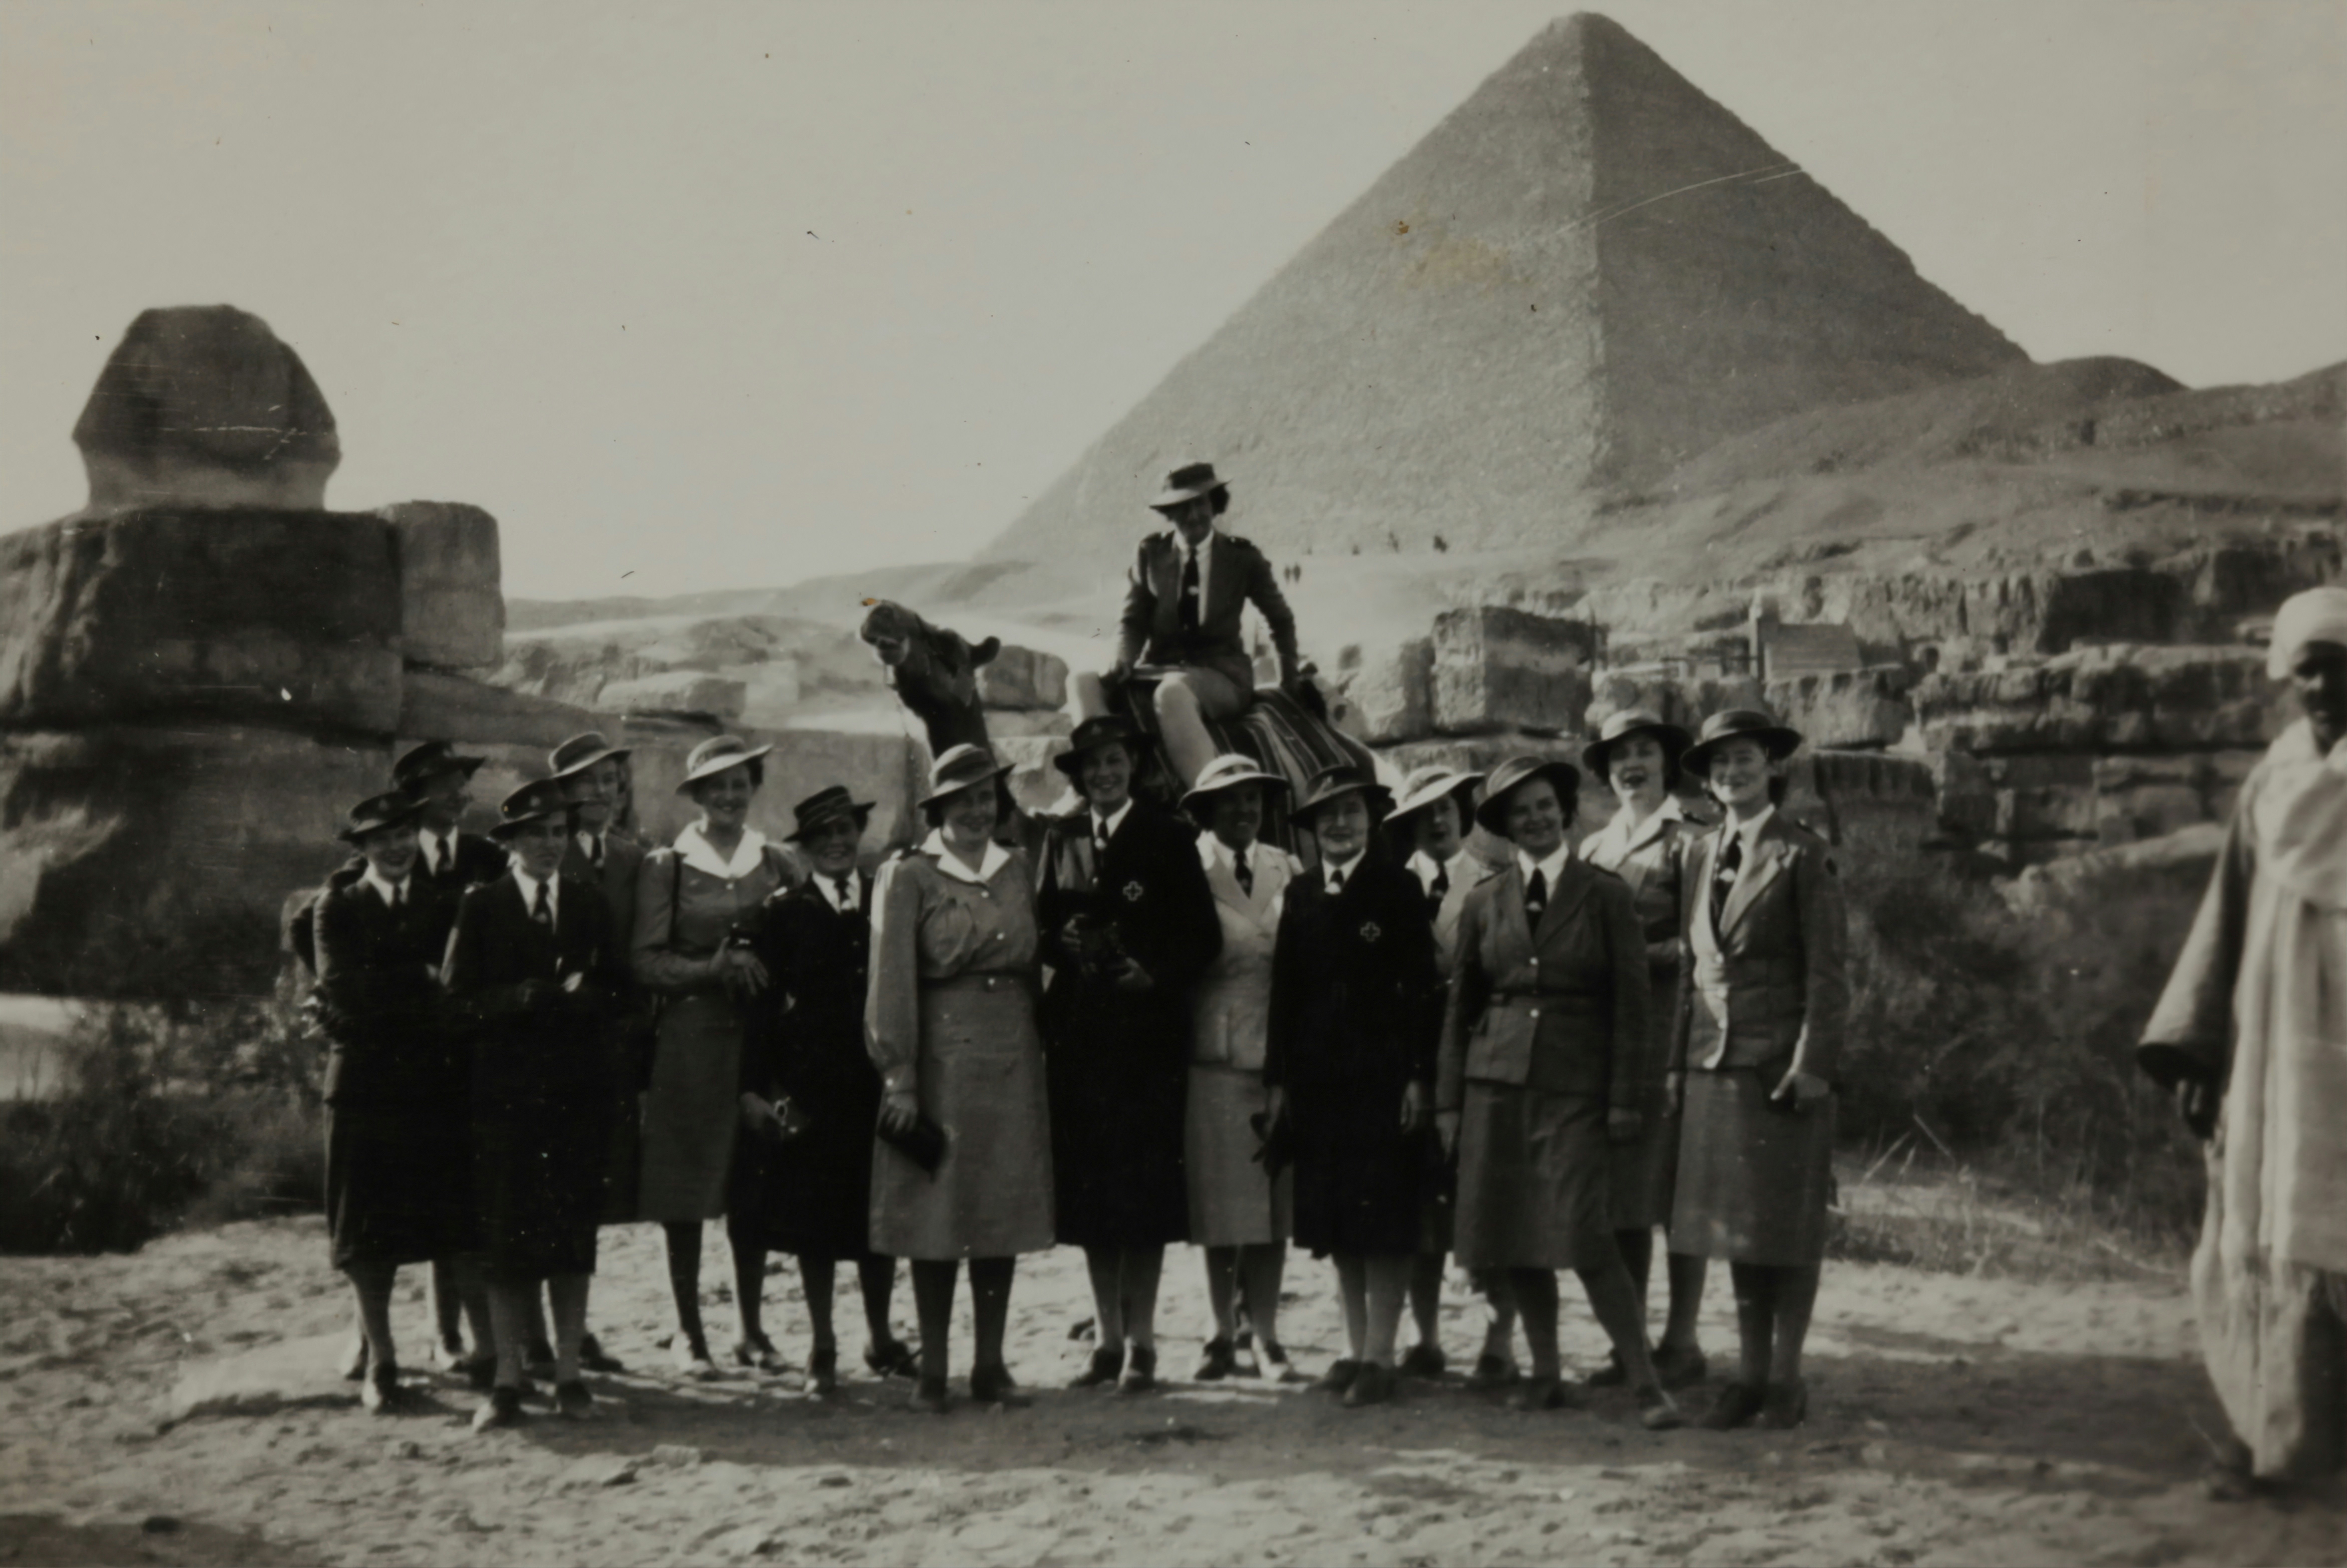 Group at the Pyramids, Egypt, Sister Isabel Erskine Plante, World War II, circa 1942